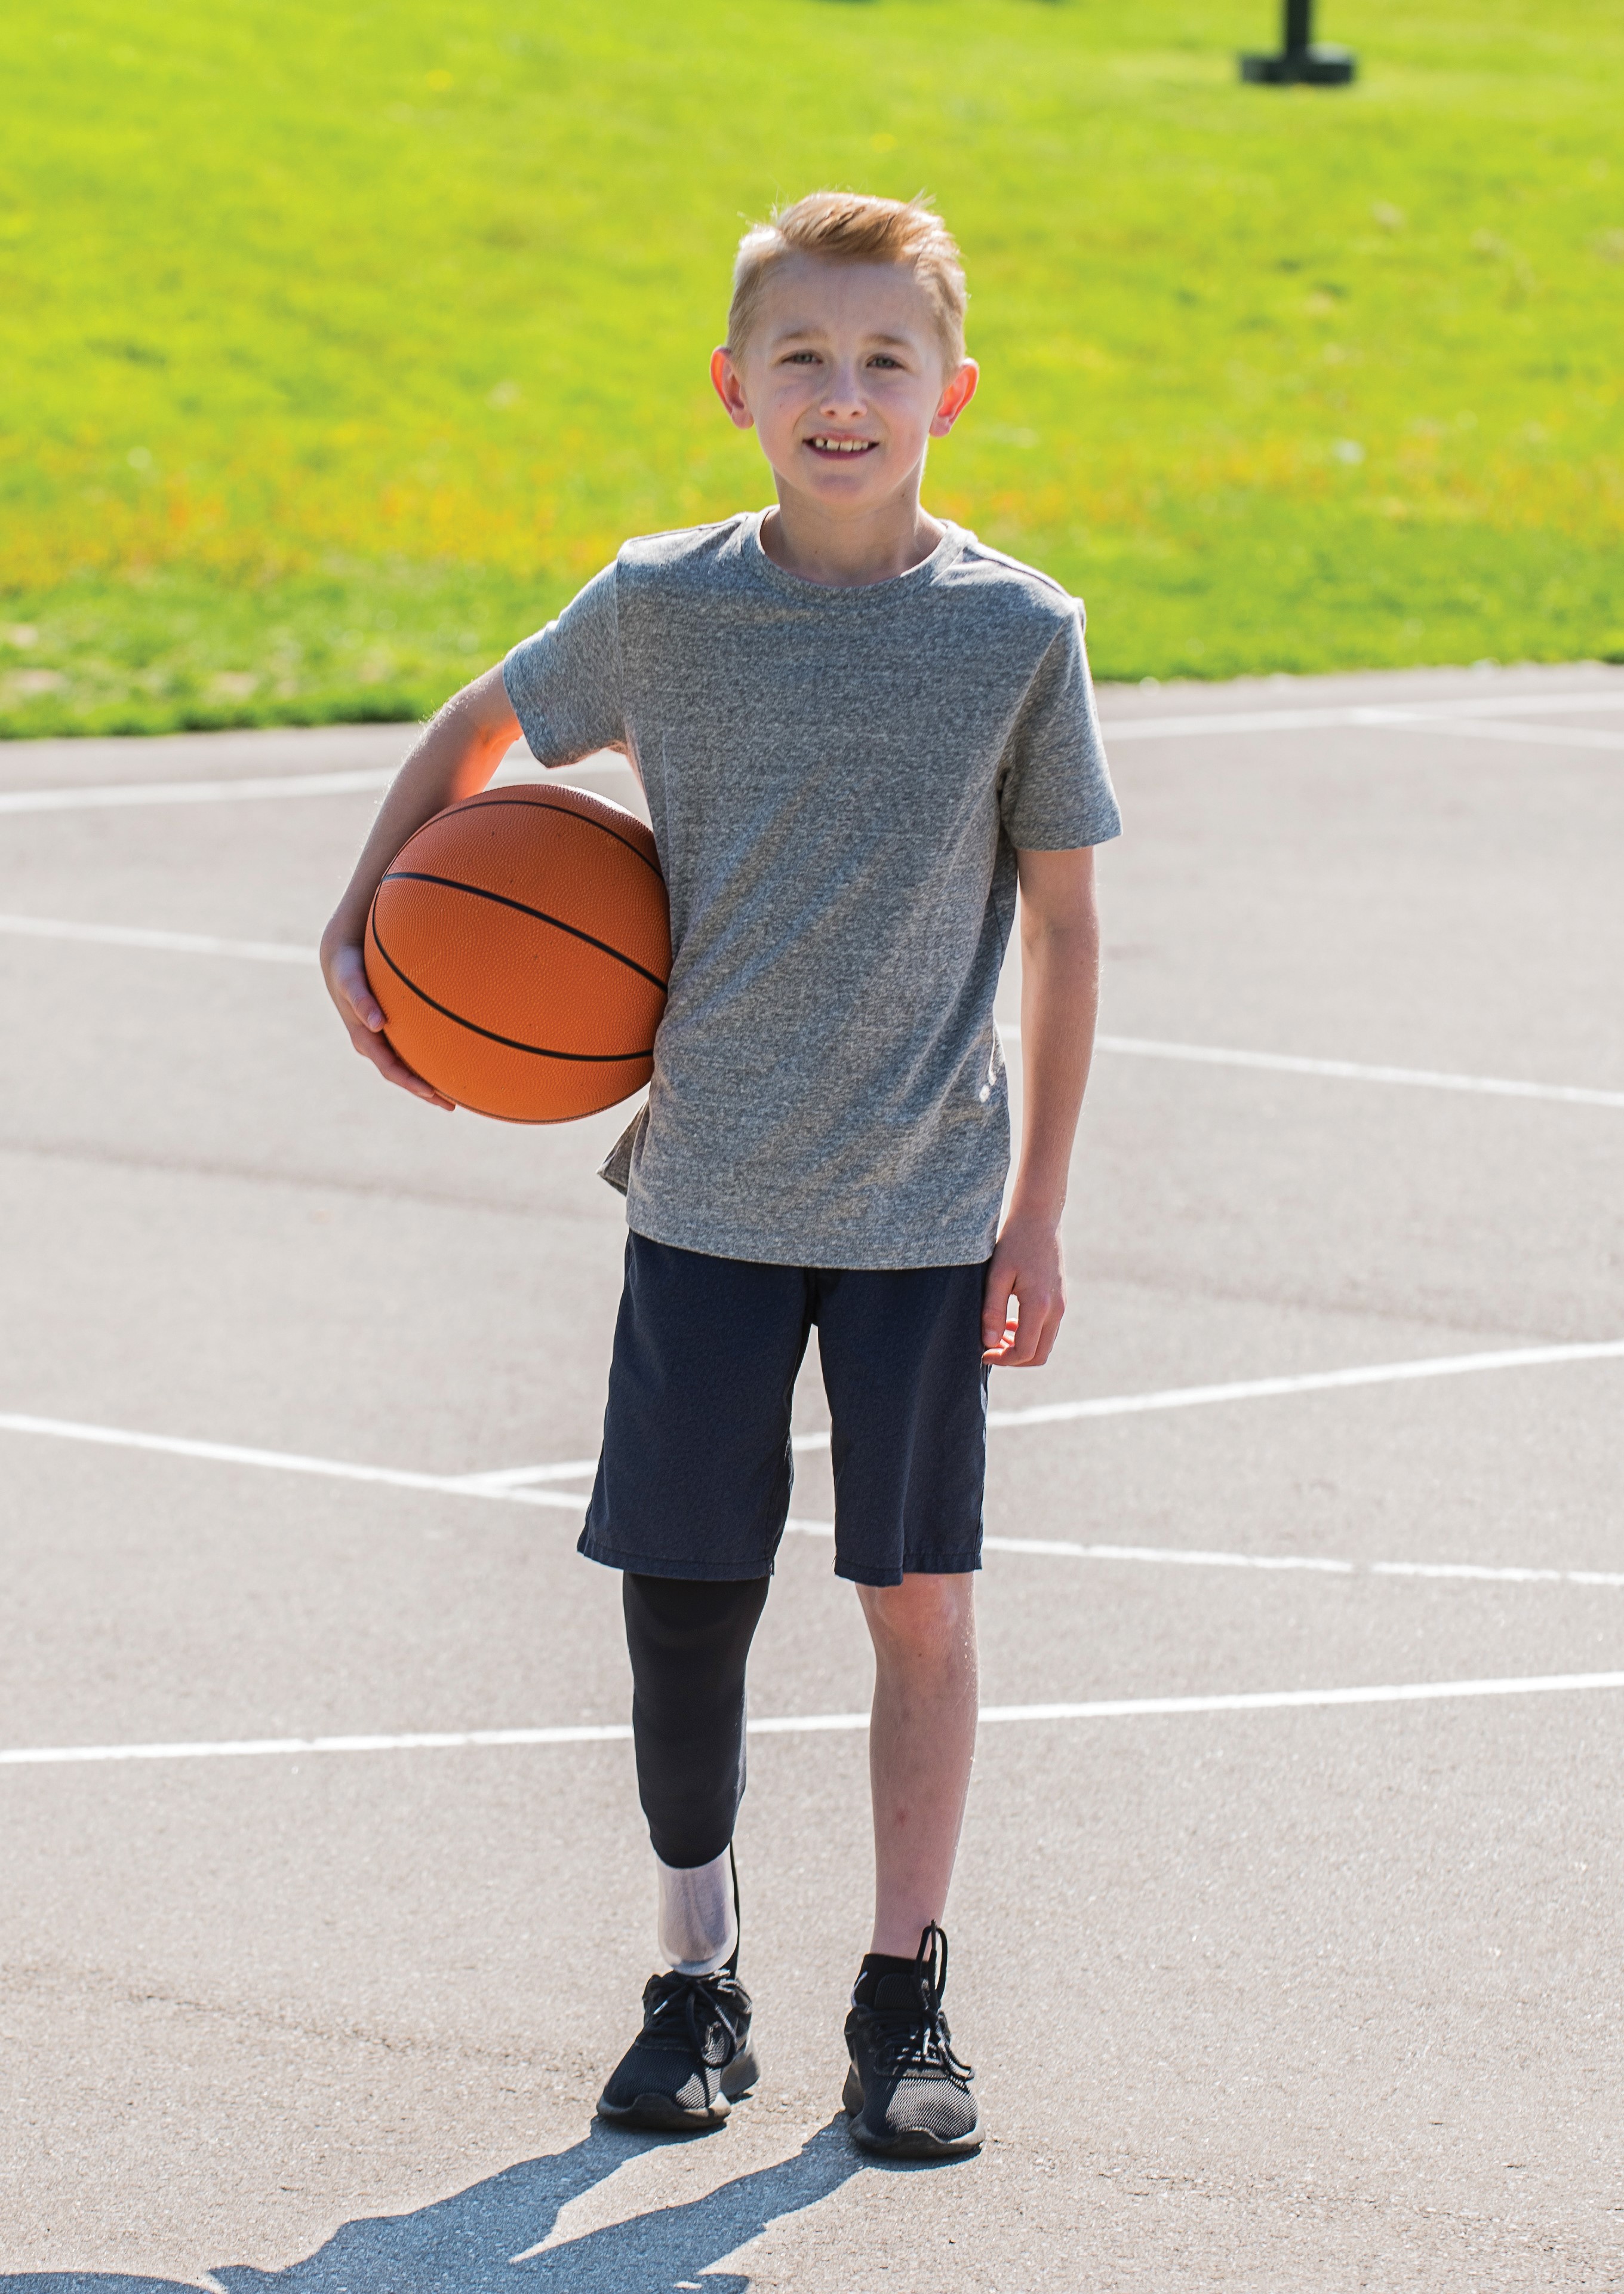 Cooper, a leg amputee, holding a basketball.